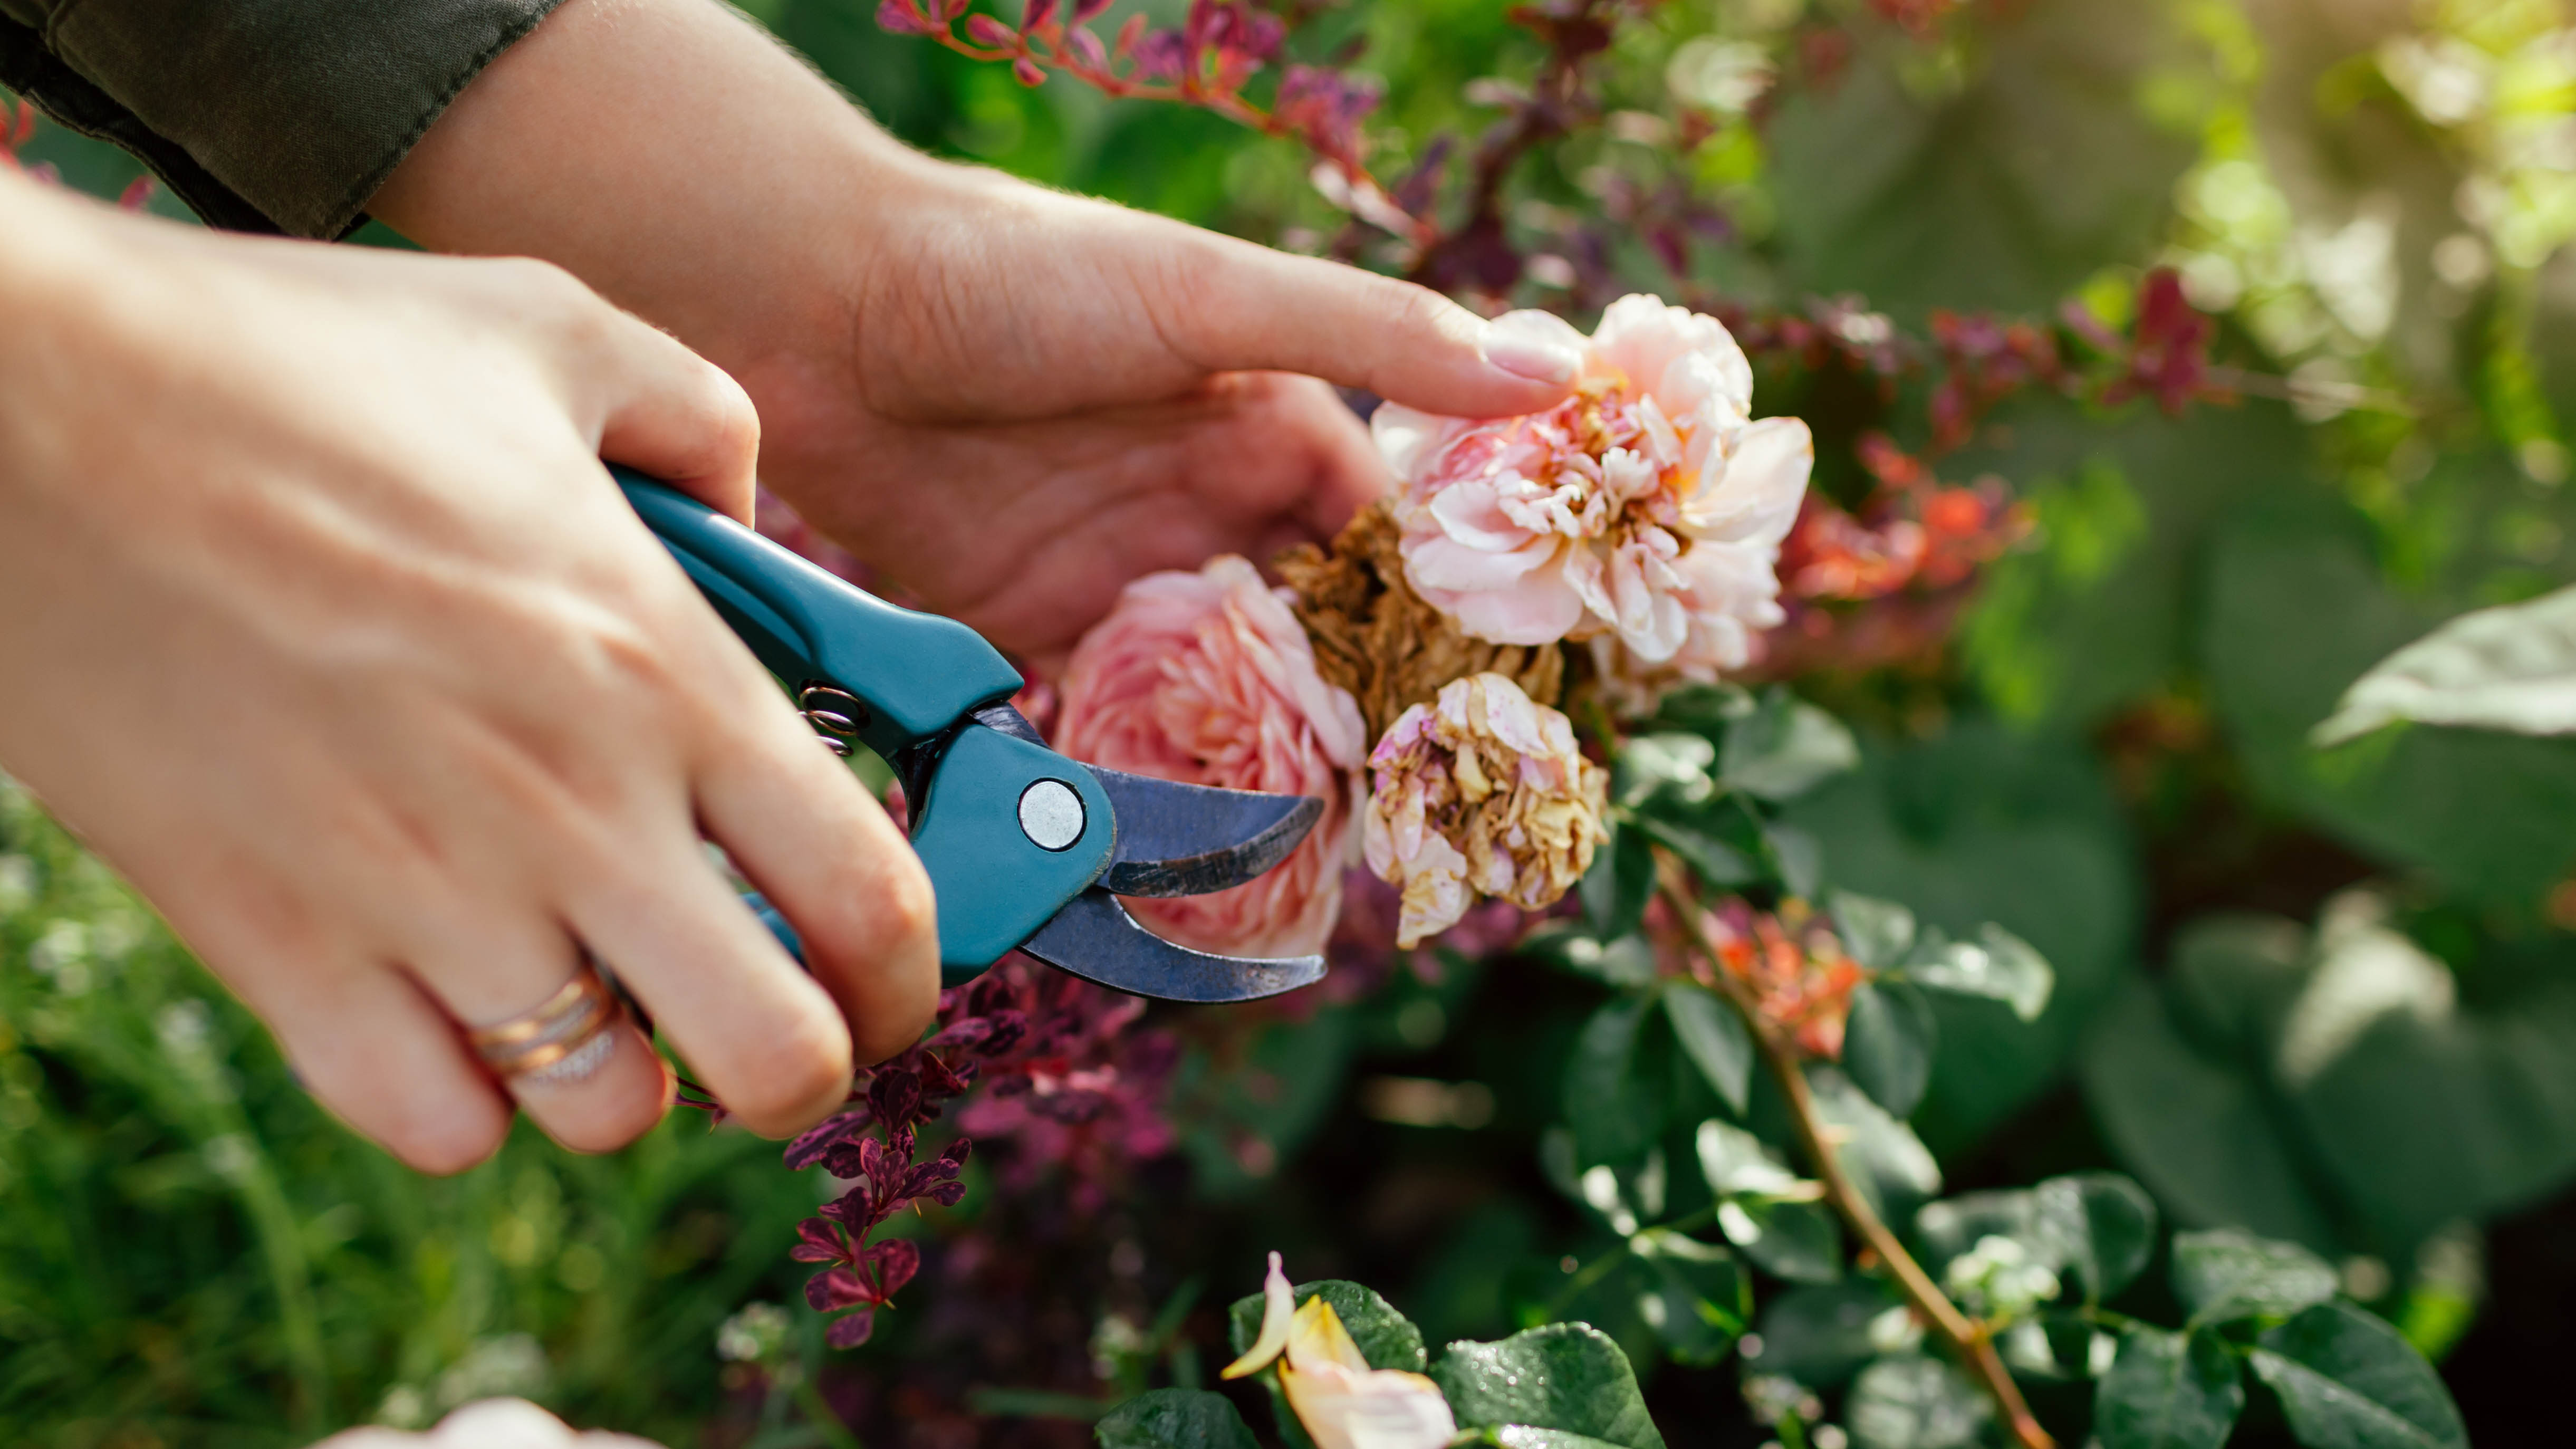 Deadheading a rose with pruning shears